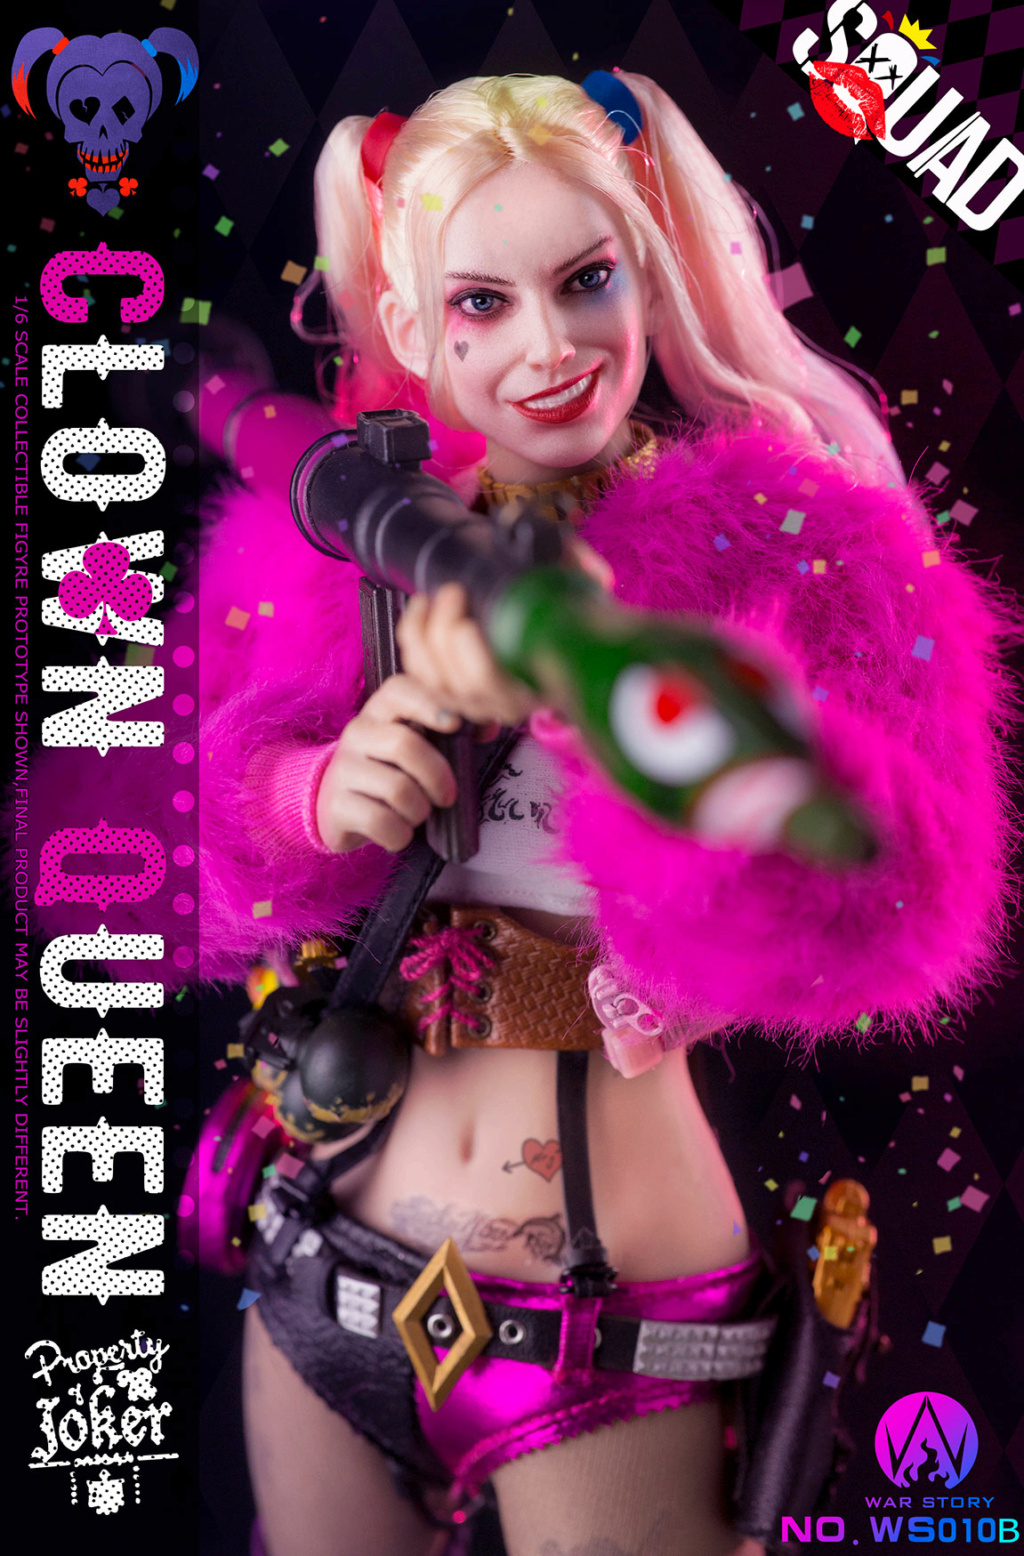 NEW PRODUCT: War Story: 1/6 Clown Queen Action Figure Normal Edition WS010-A, Deluxe Edition WS010-B 10365511